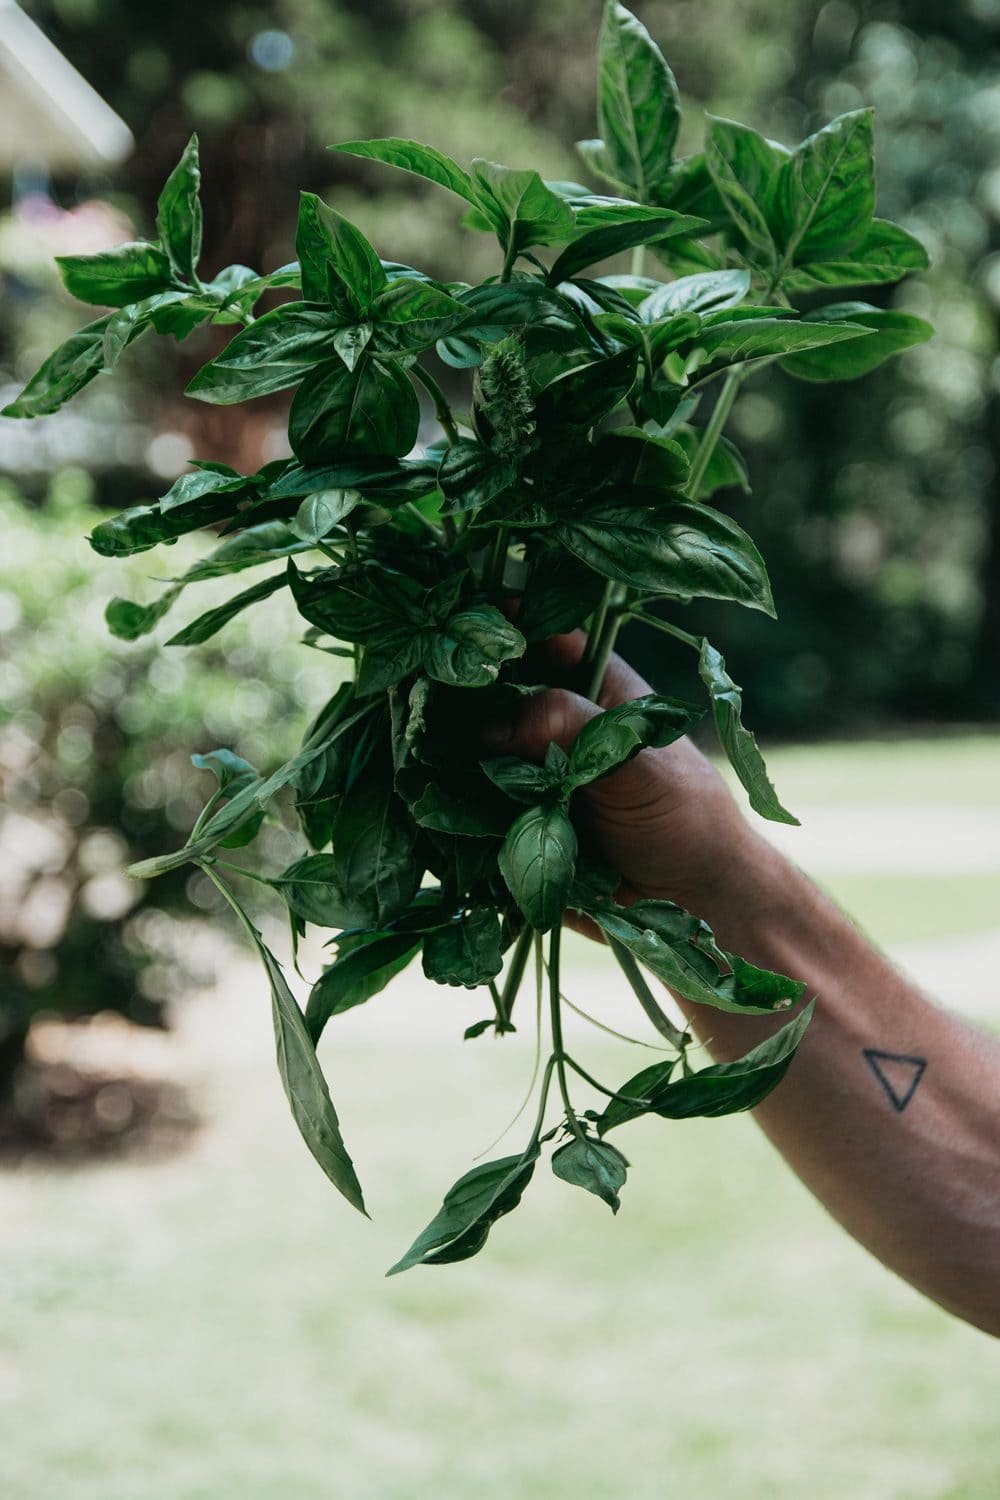 A hand holds a bundle of fresh-picked basil from the garden.